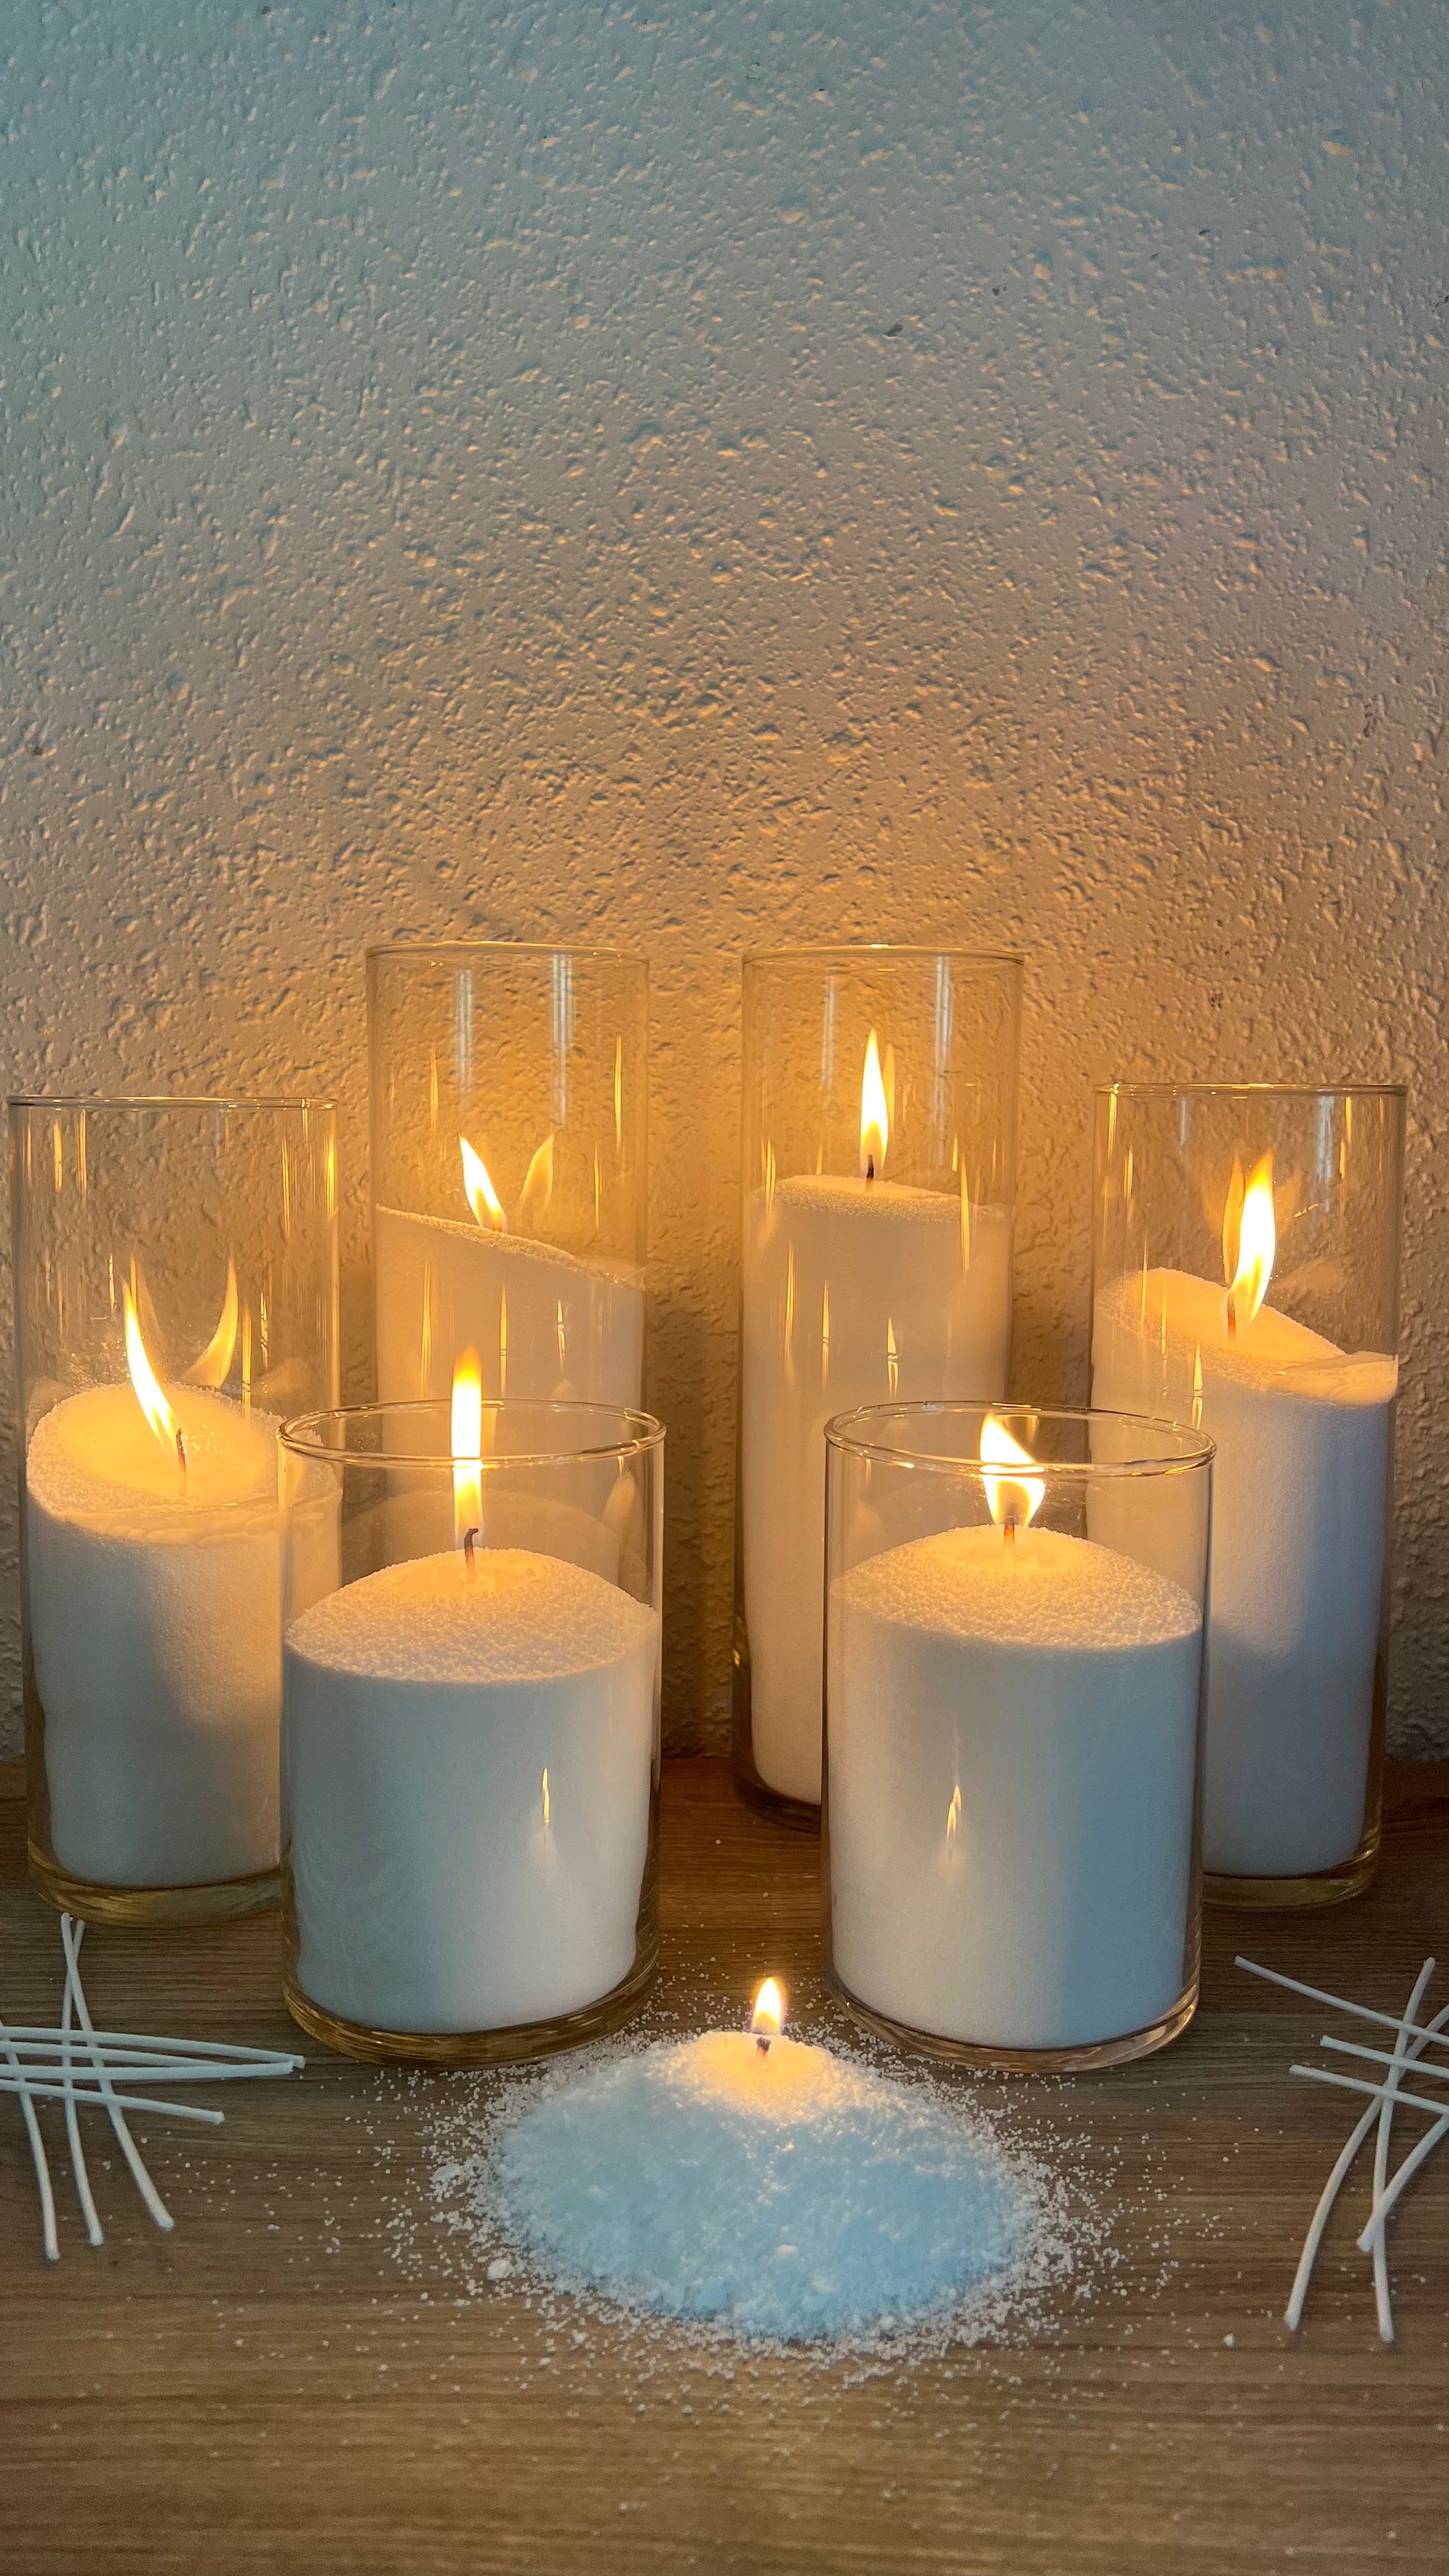 Shop Candle Wicks - Wholesale Candle Making Wicks